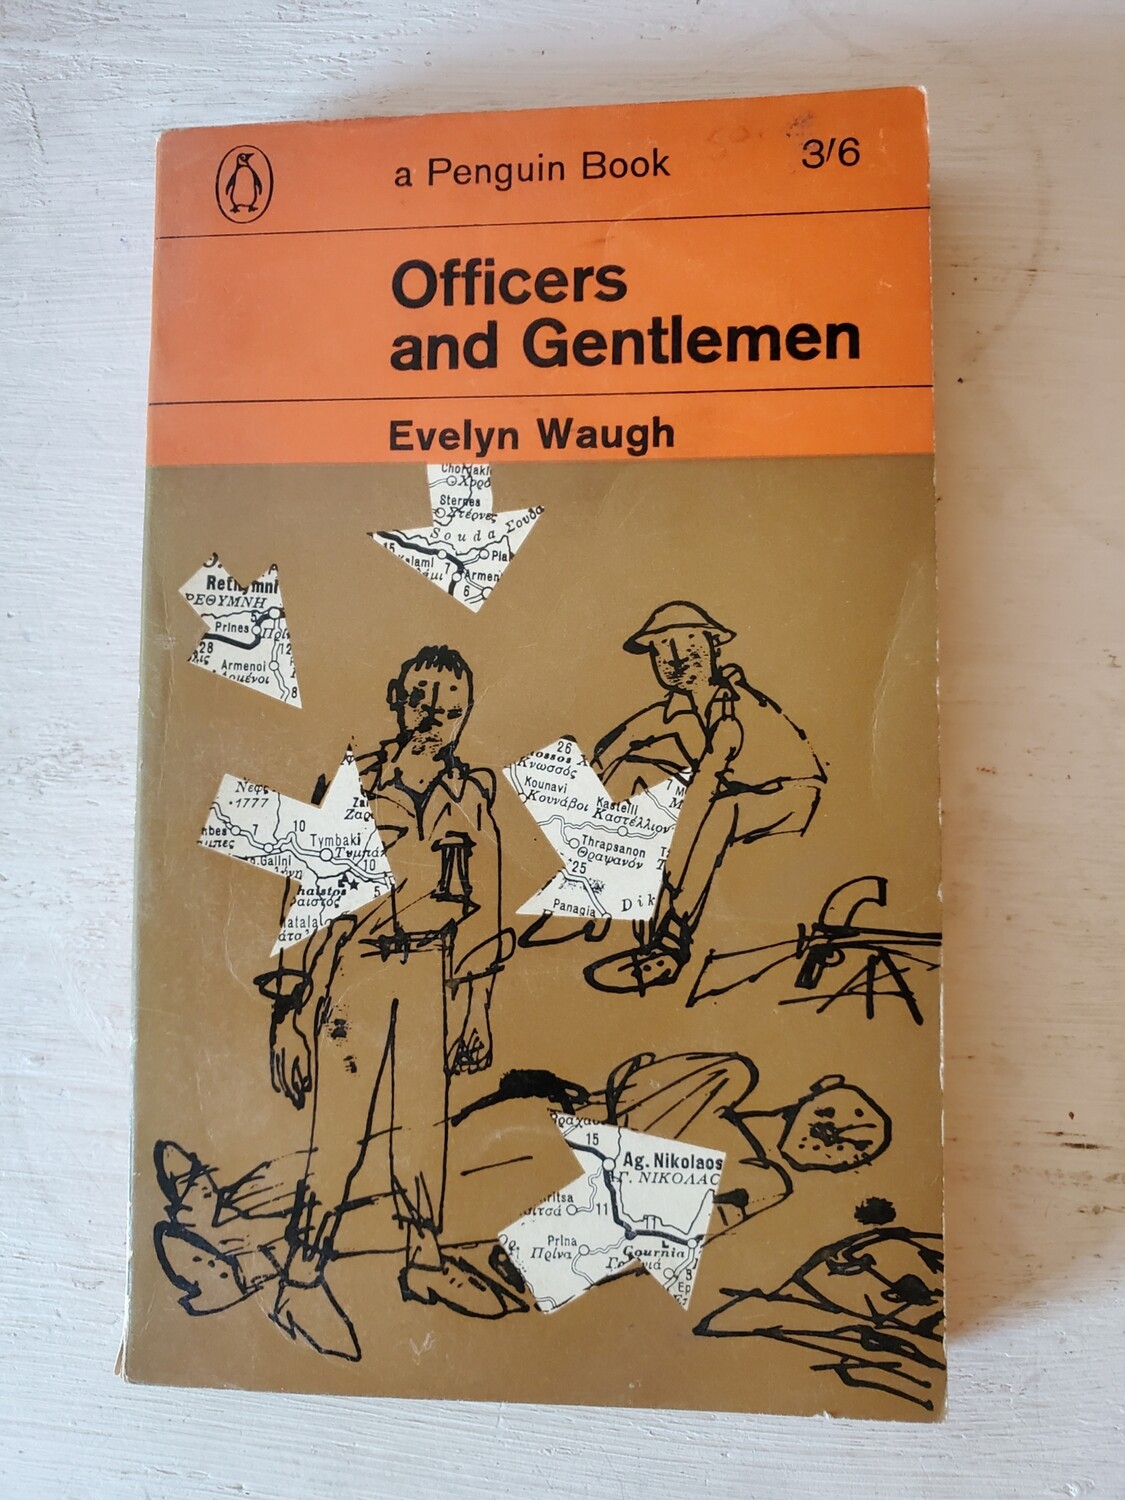 Officers and Gentlemen, Evelyn Waugh